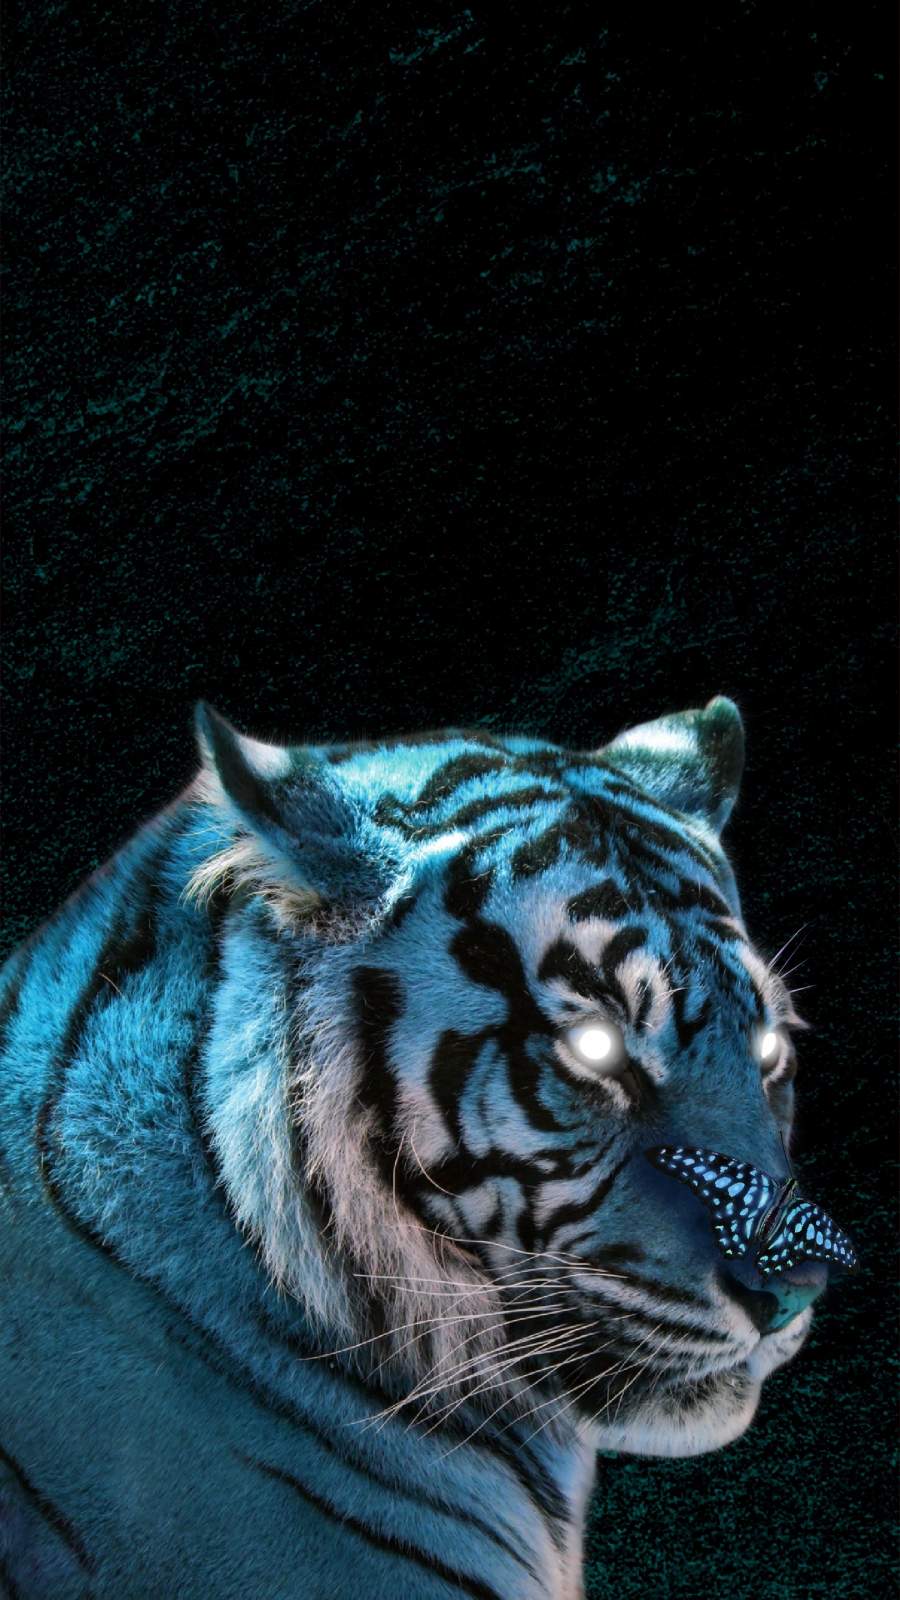 The Tiger iPhone X Wallpaper